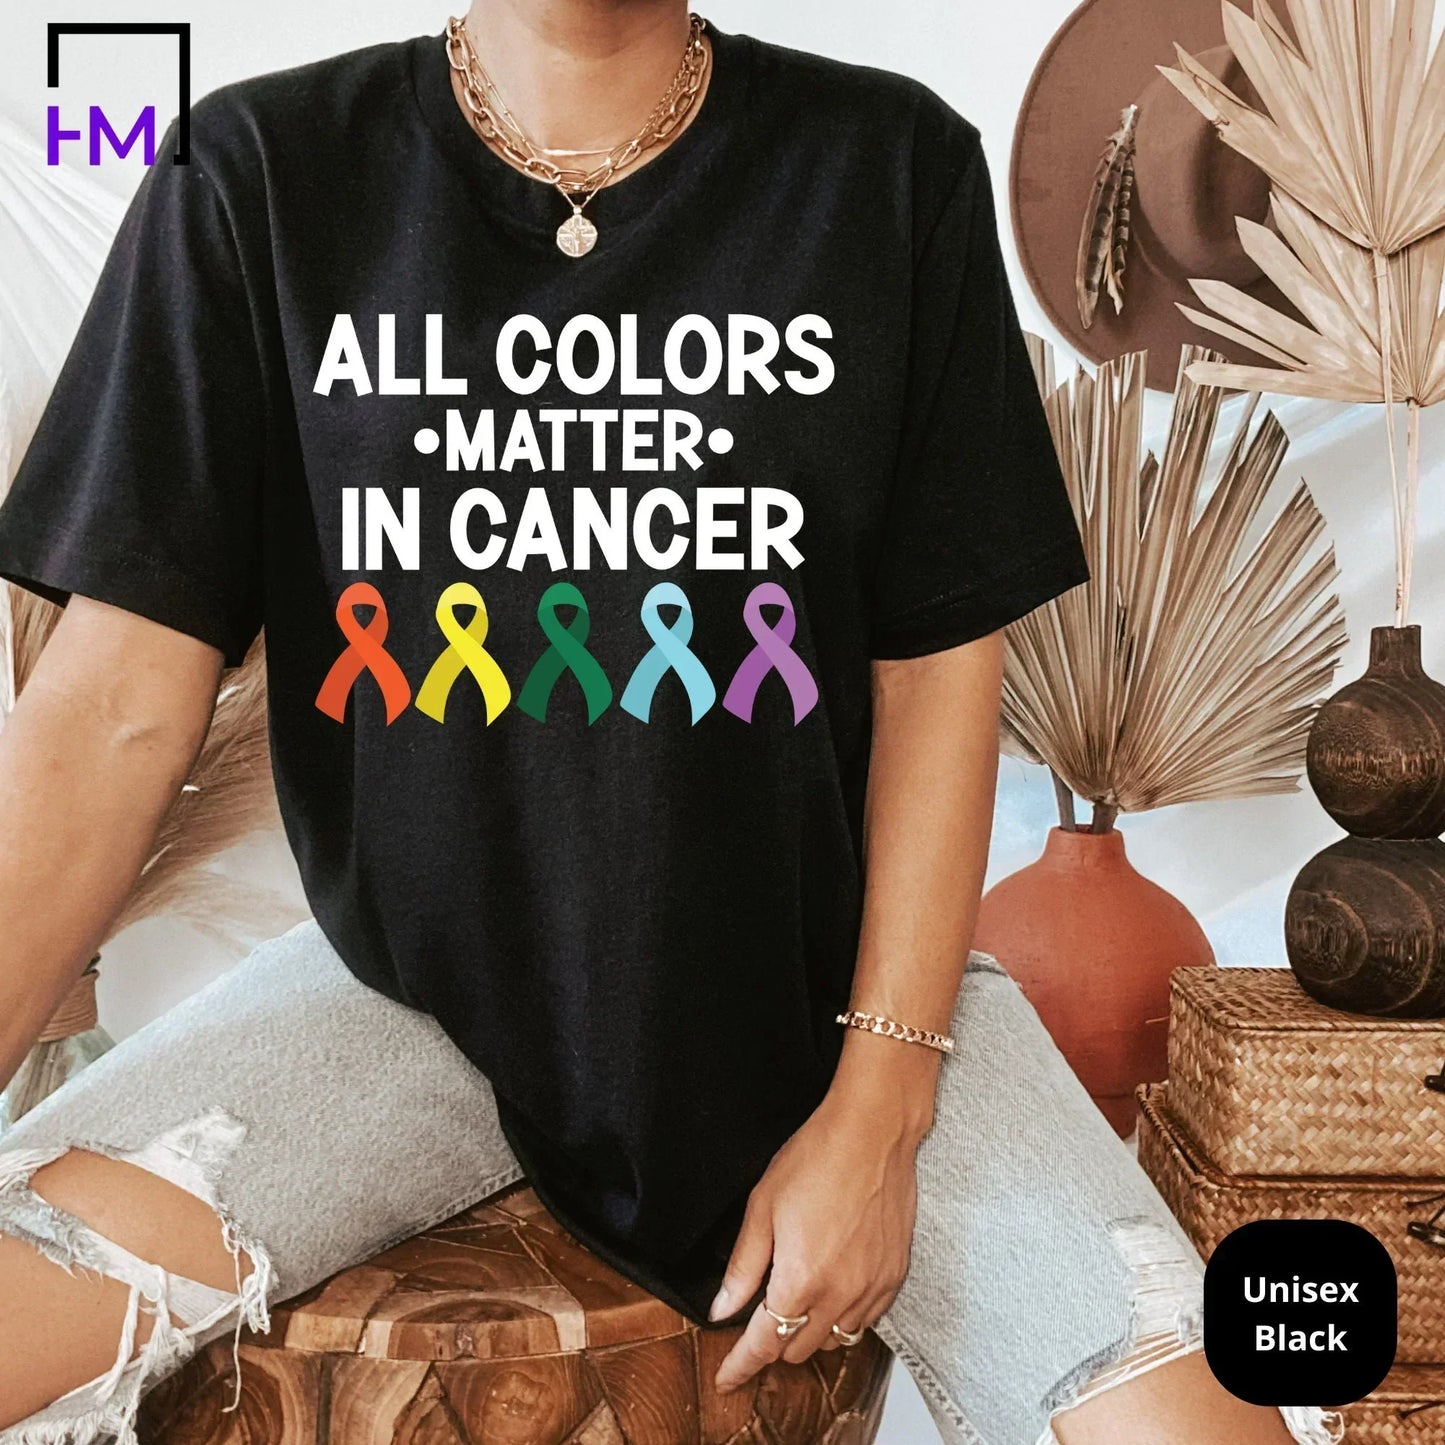 Fight Cancer in Every Color T-shirt, Colorful Cancer Awareness Gift, Cancer Ribbon Tee, Rainbow Ribbon Sweater, Cancer Support Sweatshirt